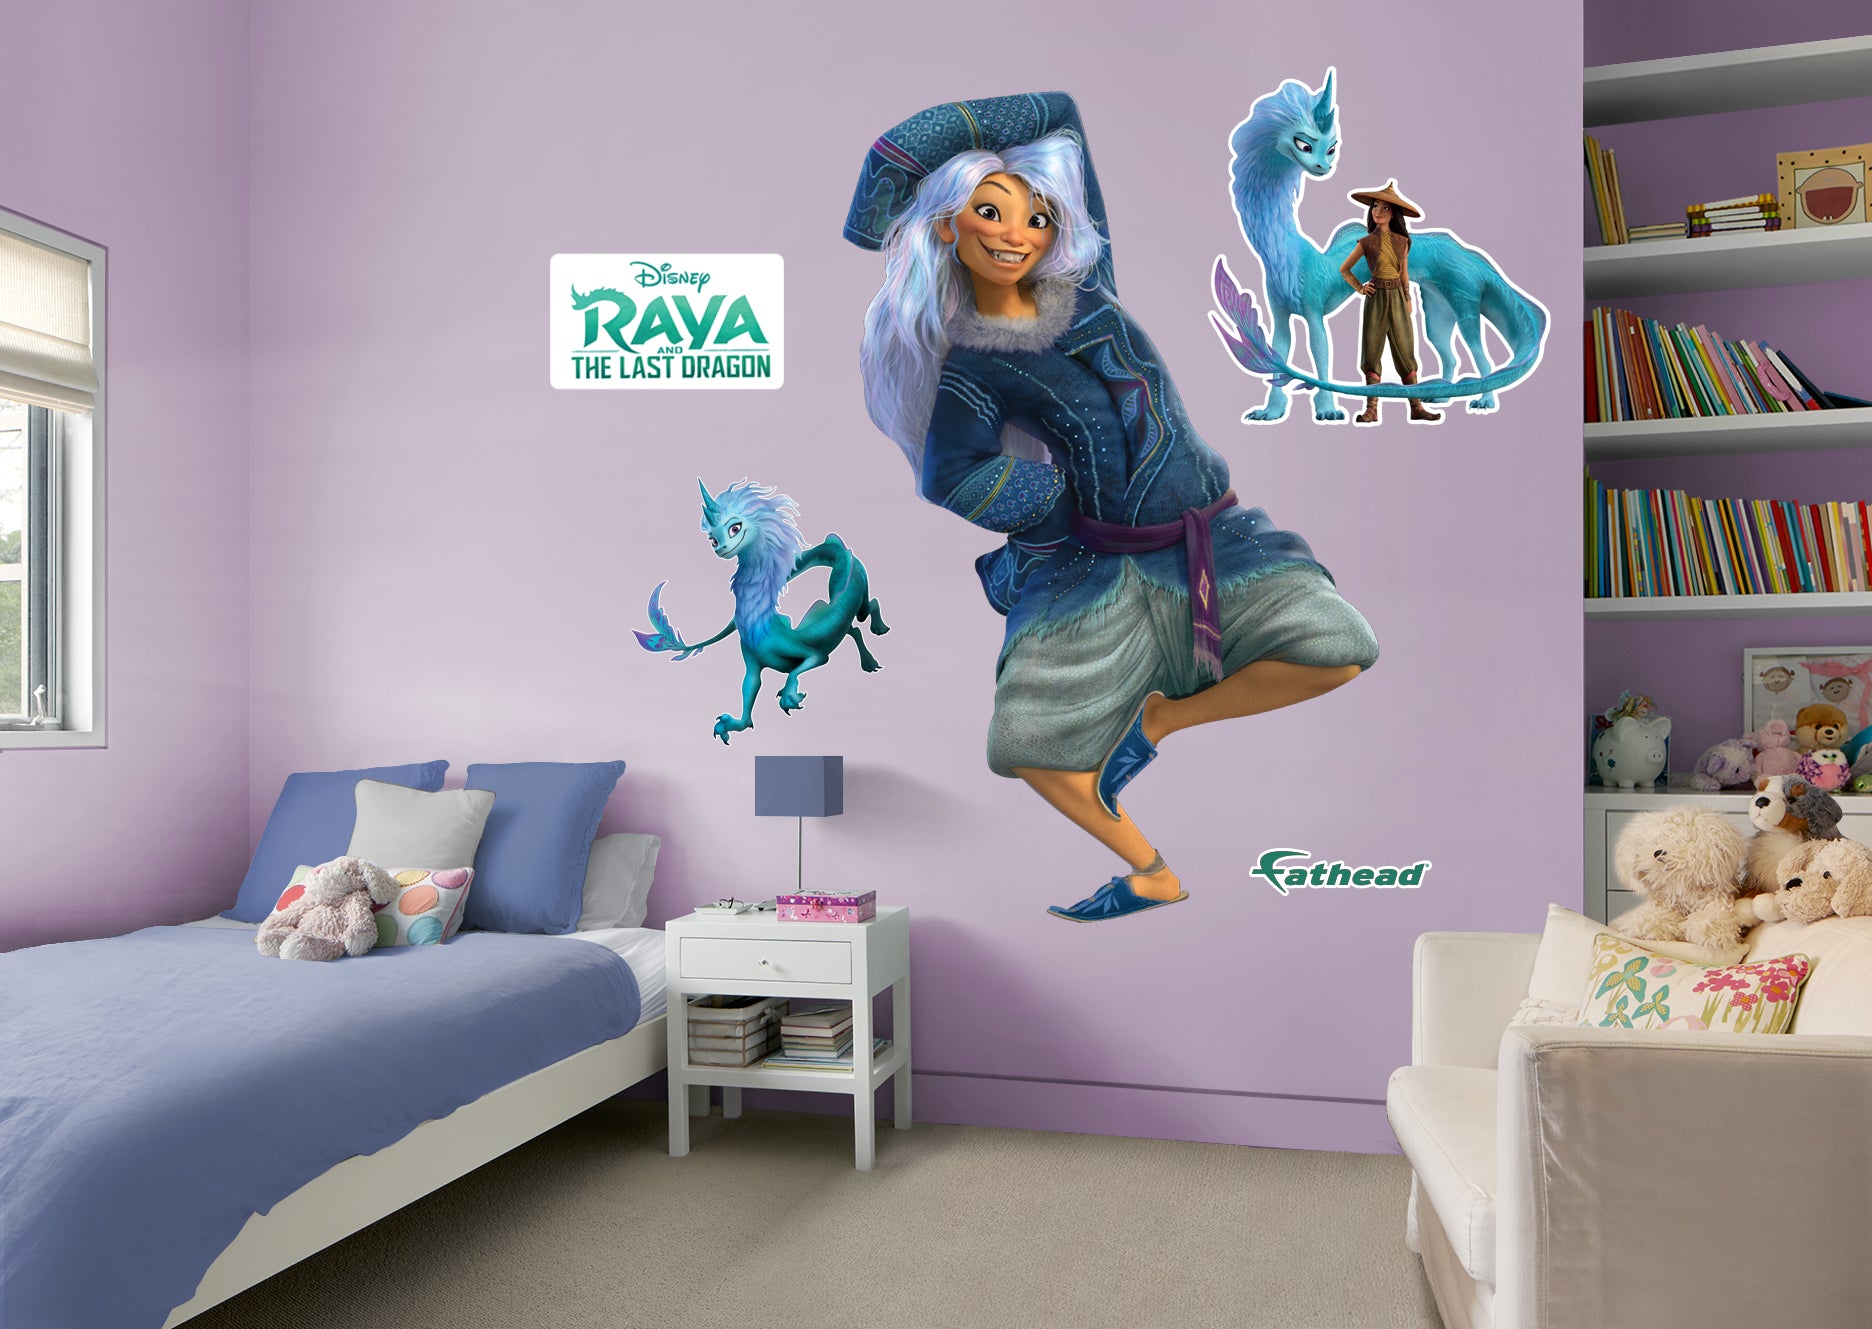 Raya and The Last Dragon Sisu Human Character RealBig - Officially Licensed Disney Removable Wall Decal Large by Fathead | Vinyl